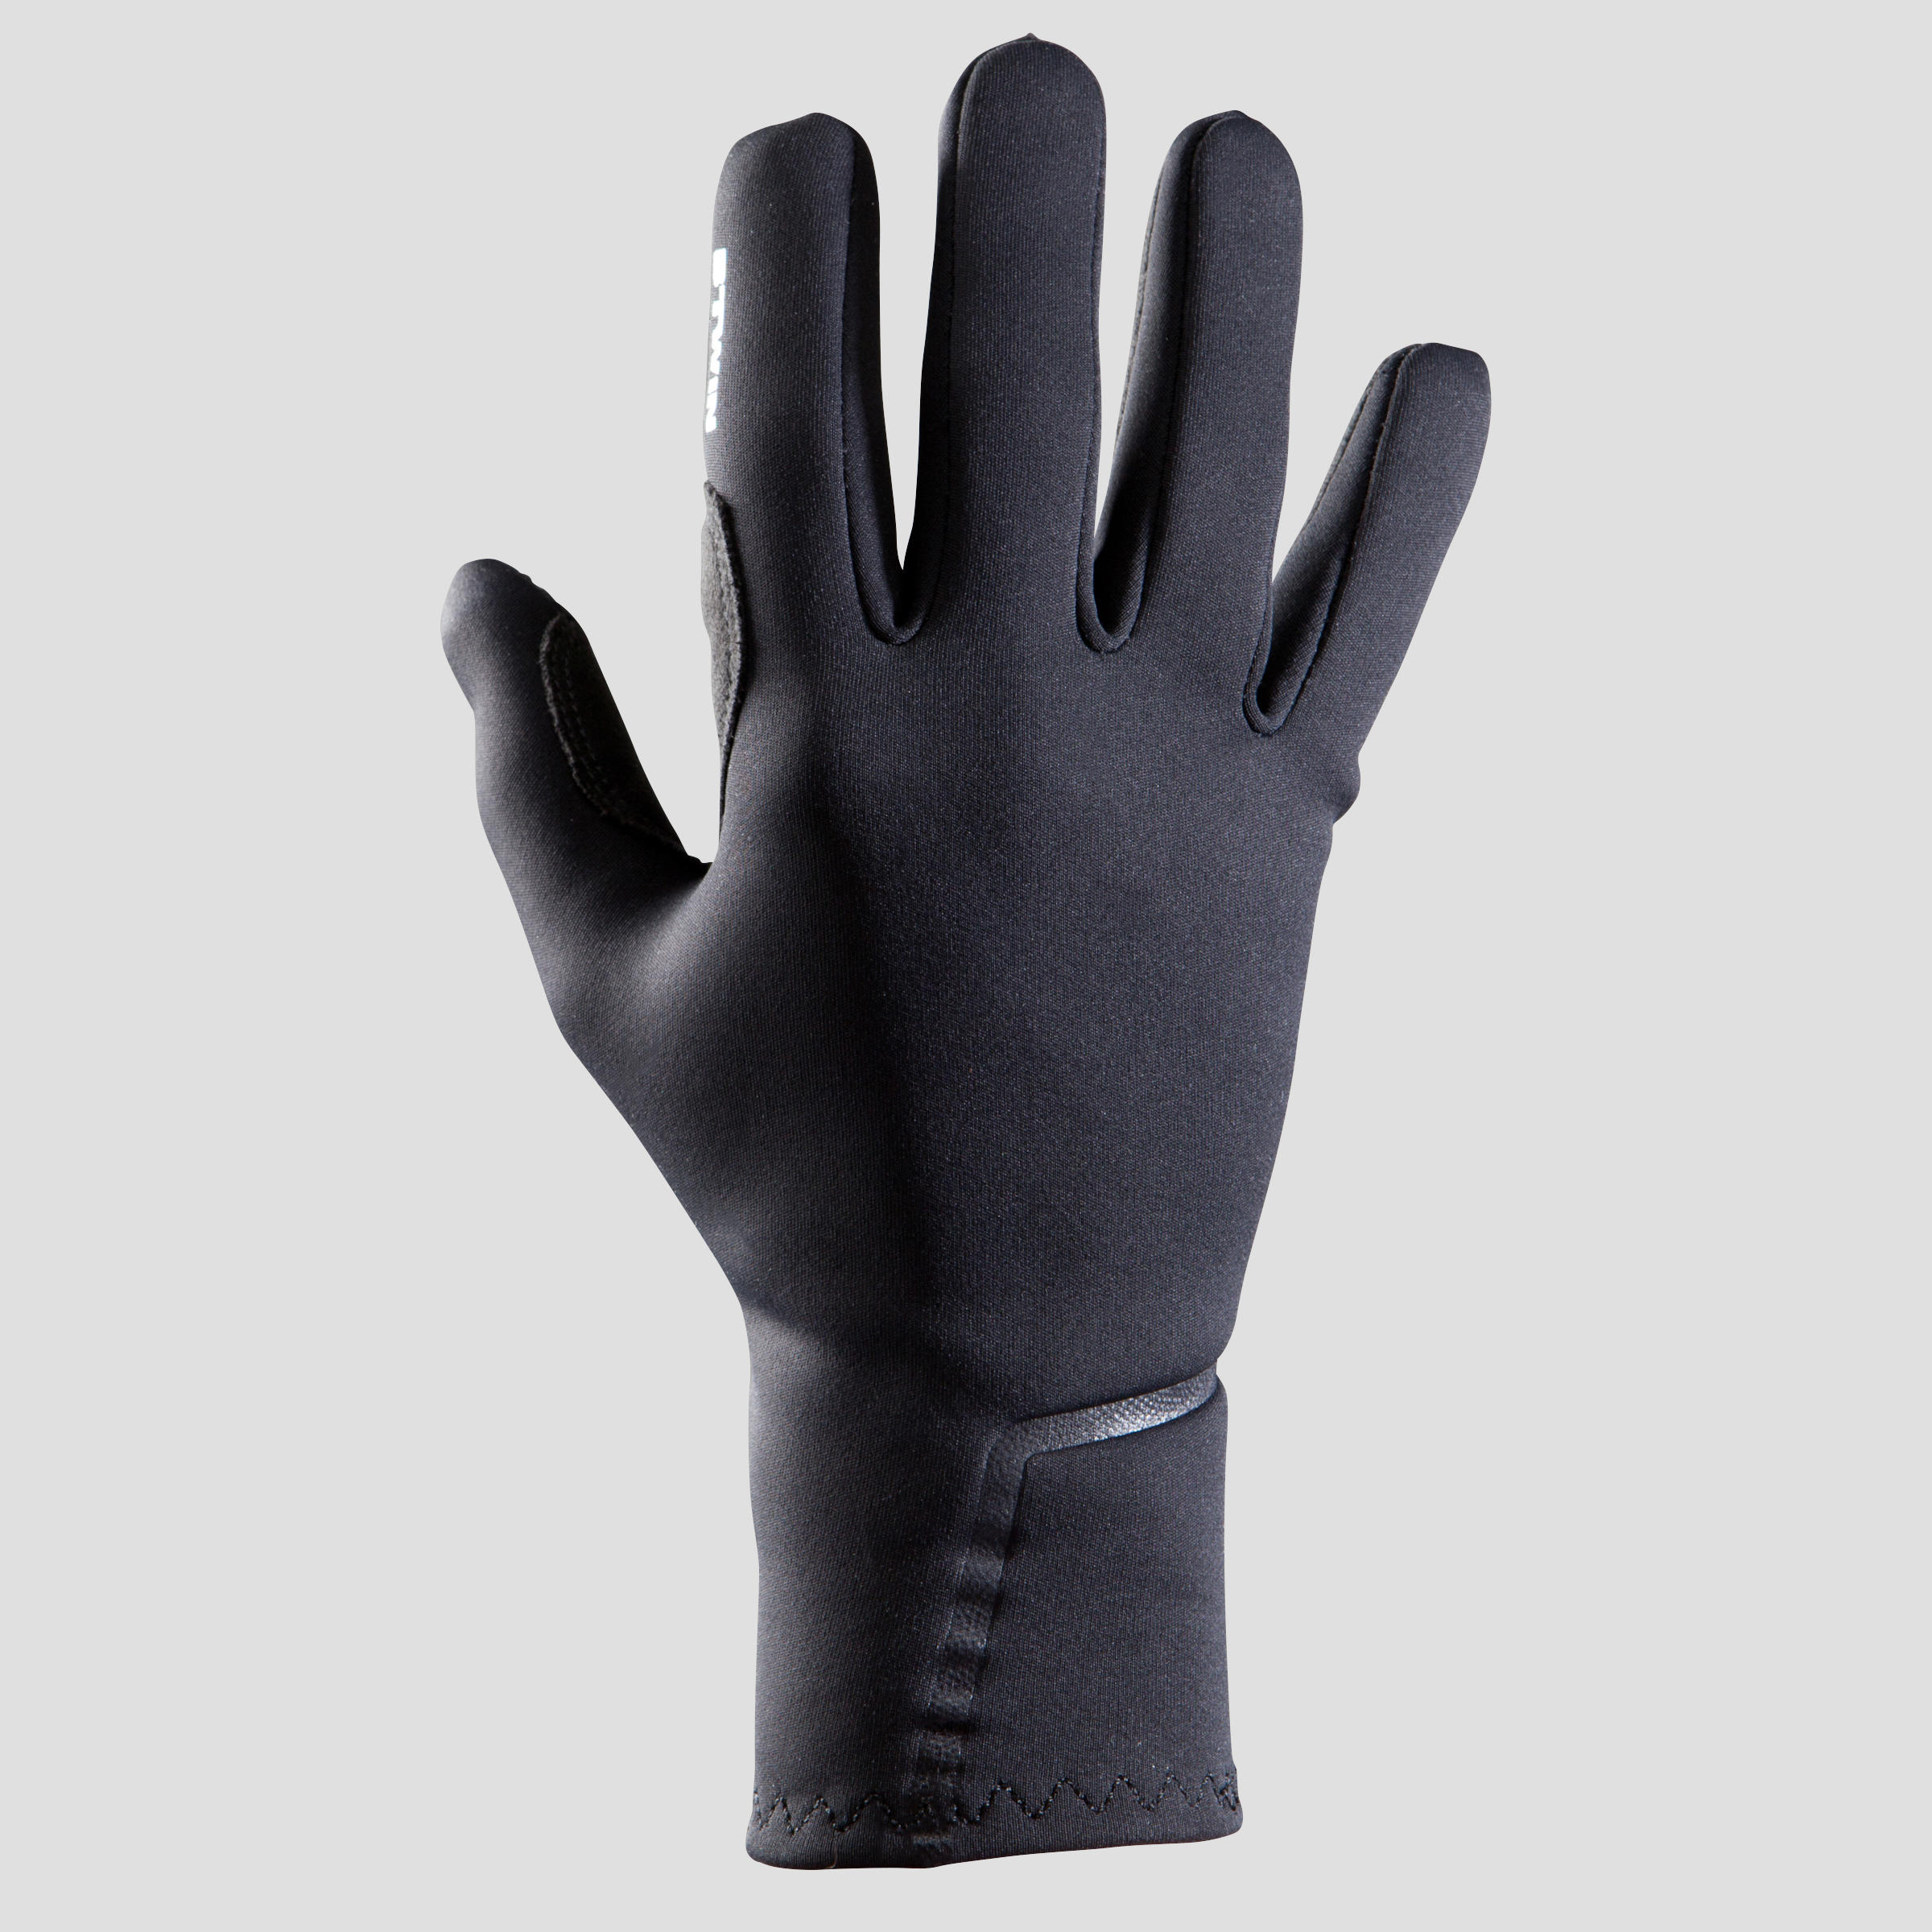 500 Cycling Gloves for Spring/Autumn - Black 2/9